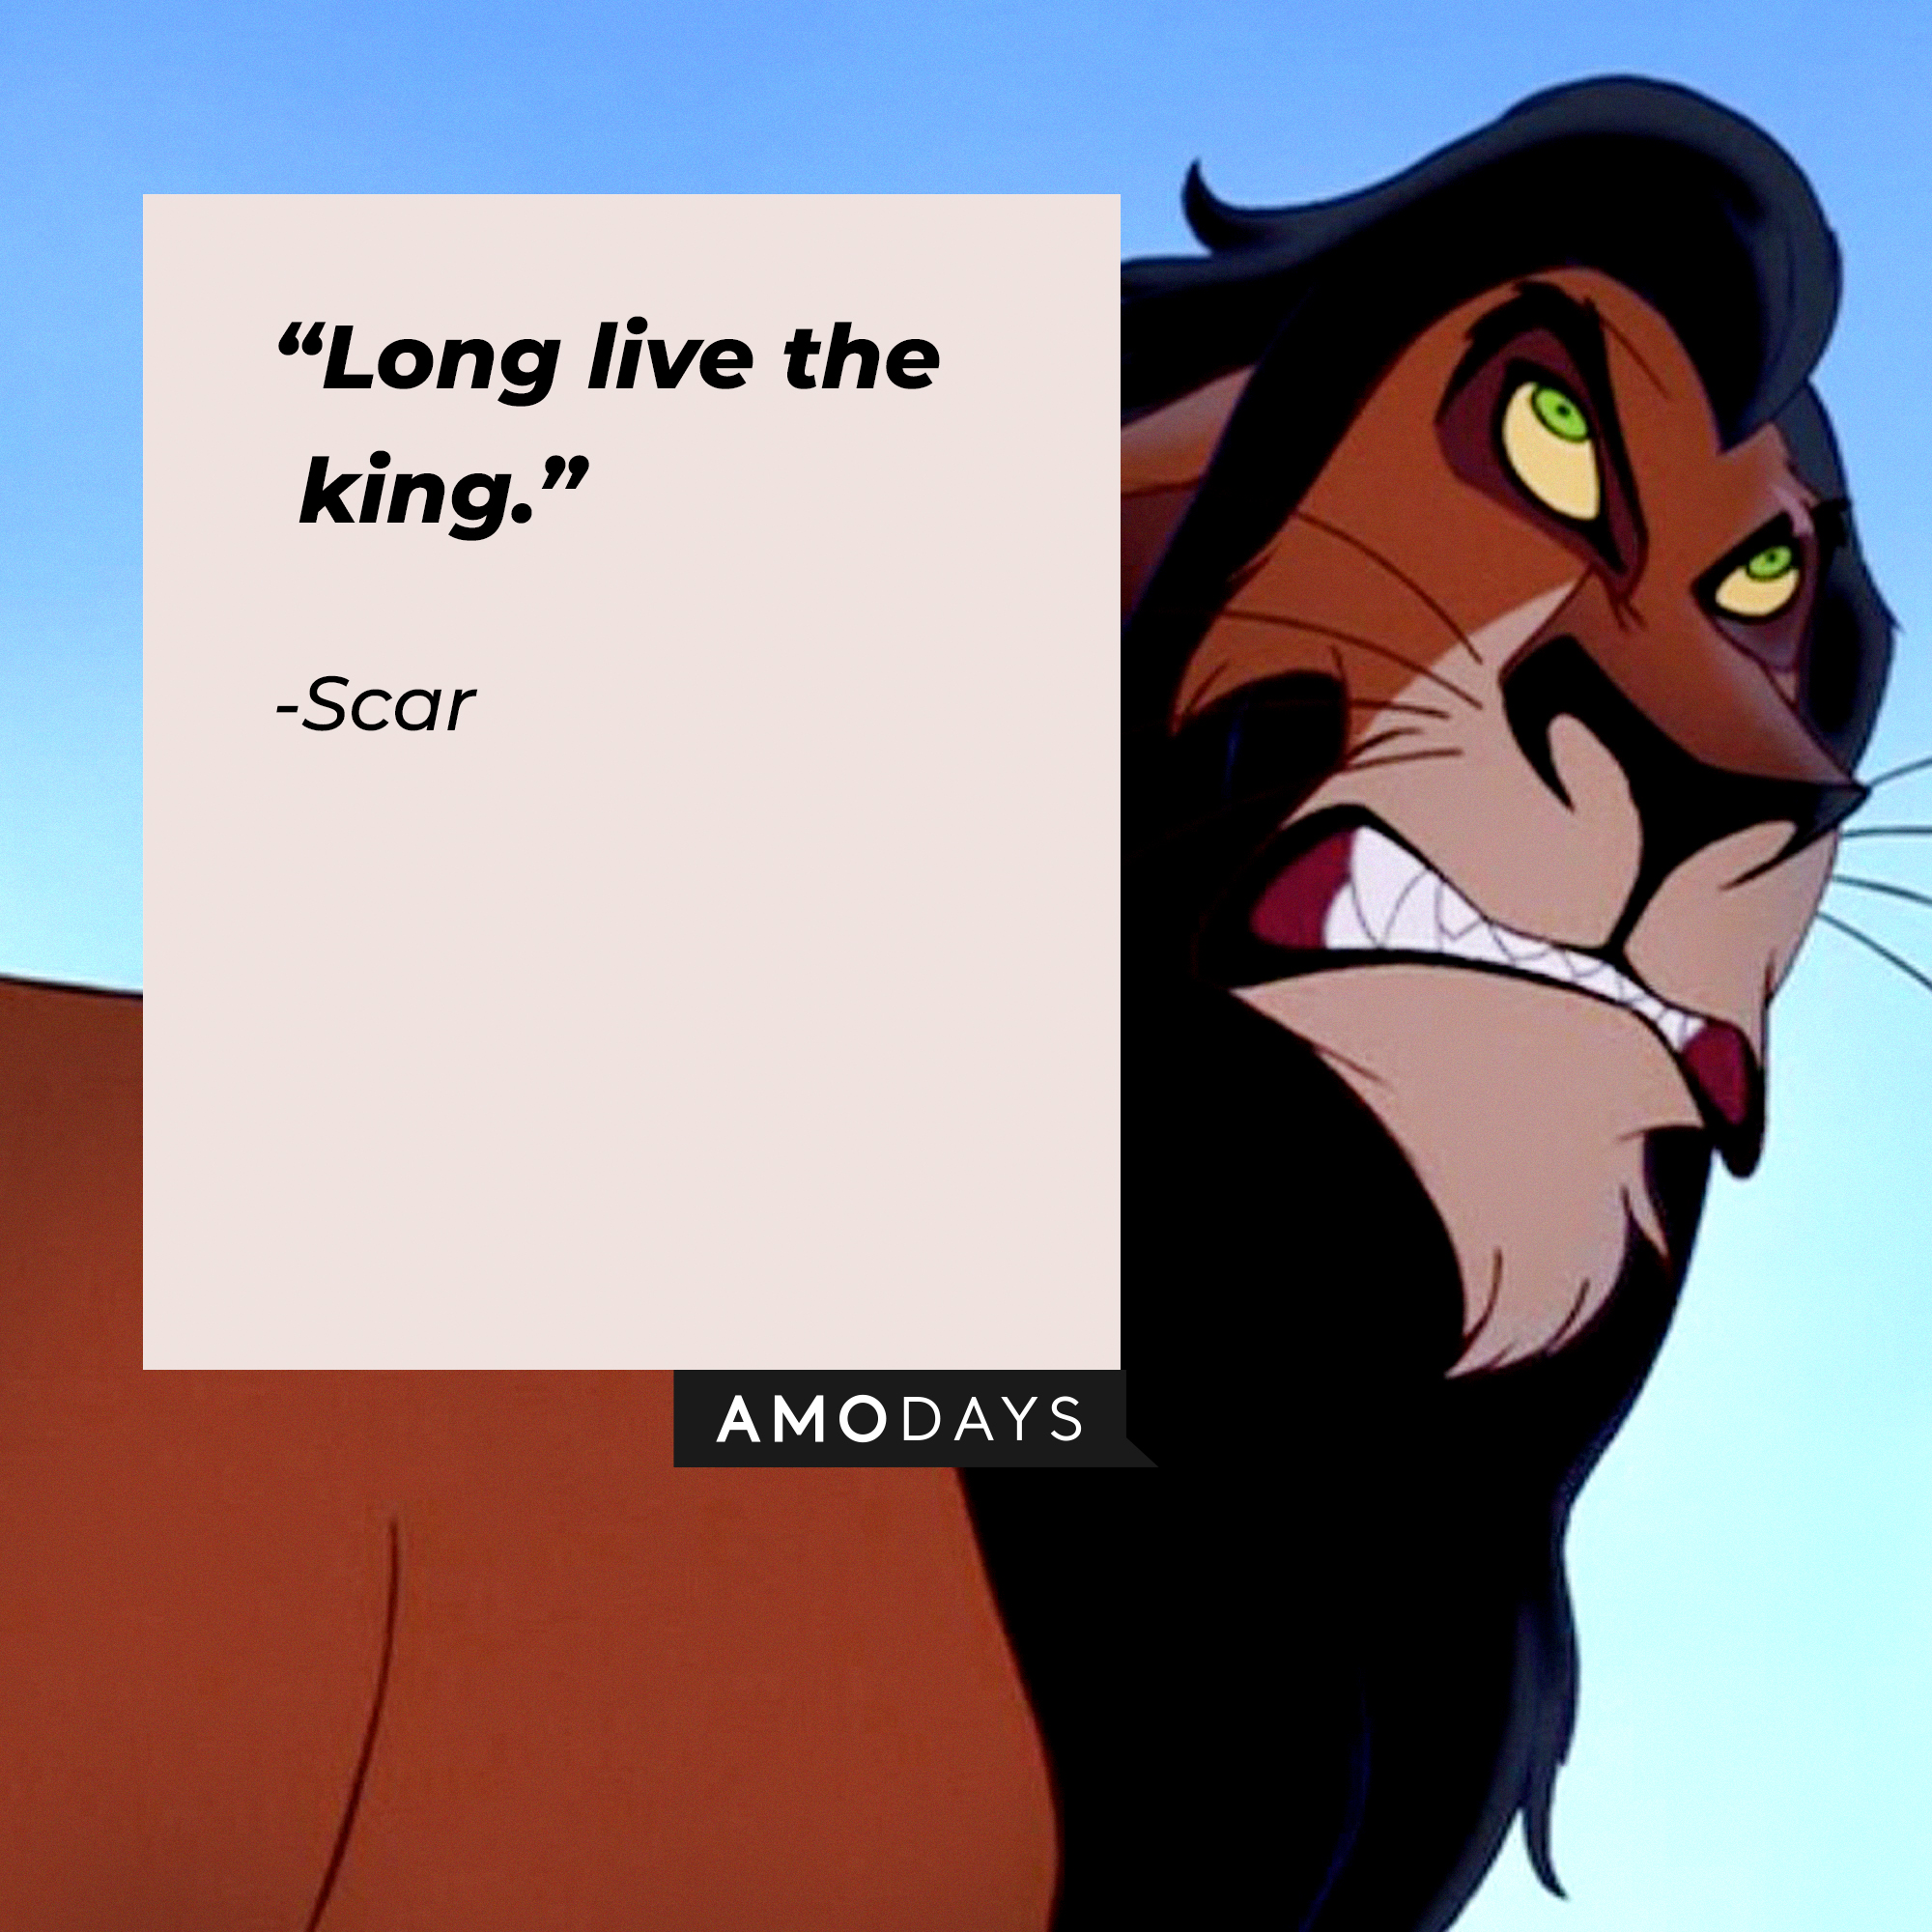 A photo of Scar with the quote, "Long live the king." | Source: Facebook/DisneyTheLionKing